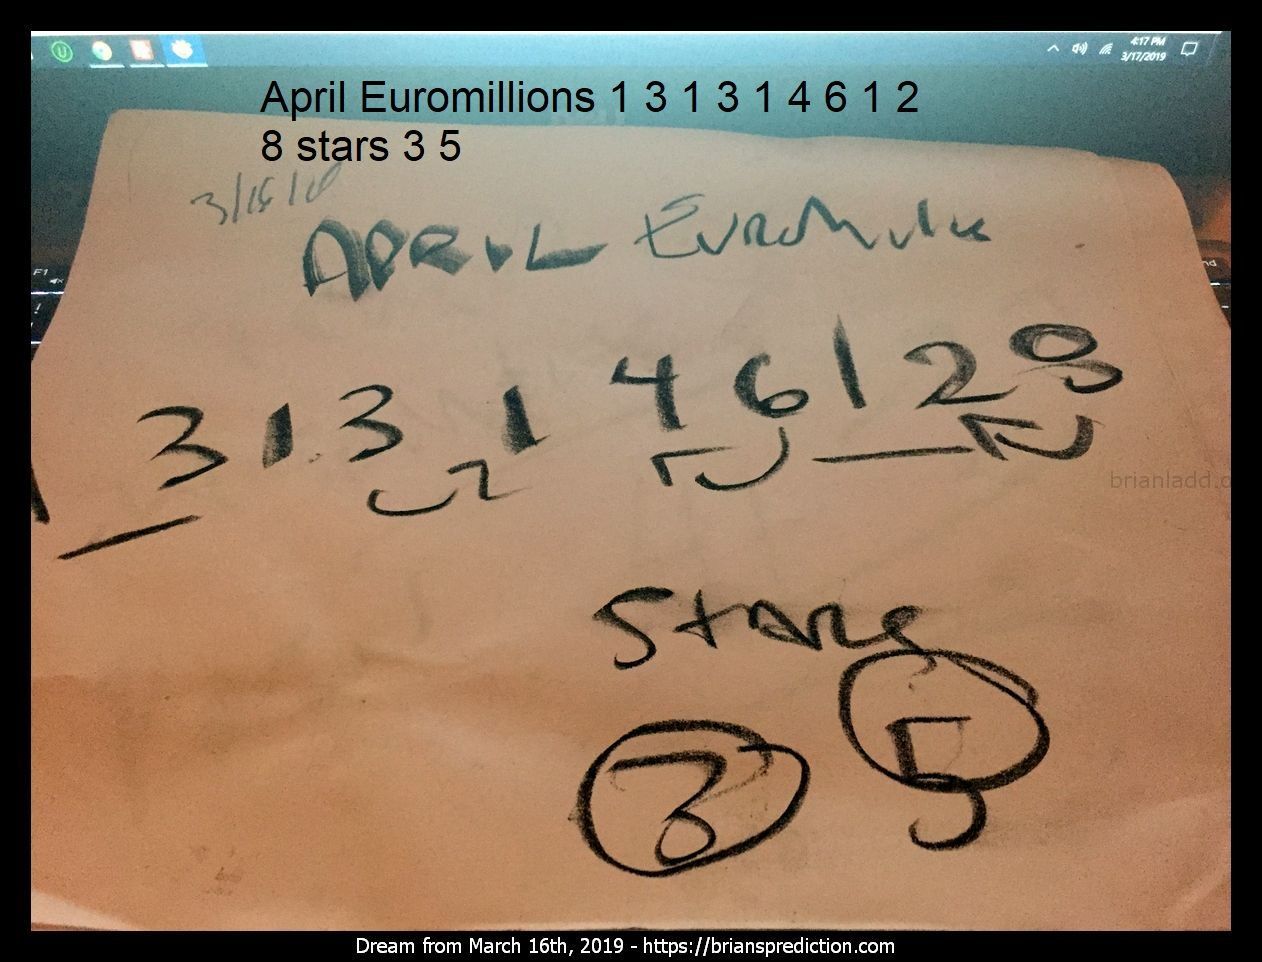 11789 16 March 2019 5 - April Euromillions 1 3 1 3 1 4 6 1 2 8 Stars 3 5  Dream Number 11789 16 March 2019 5 Psychic Pre...
April Euromillions 1 3 1 3 1 4 6 1 2 8 Stars 3 5  Dream Number 11789 16 March 2019 5 Psychic Prediction
